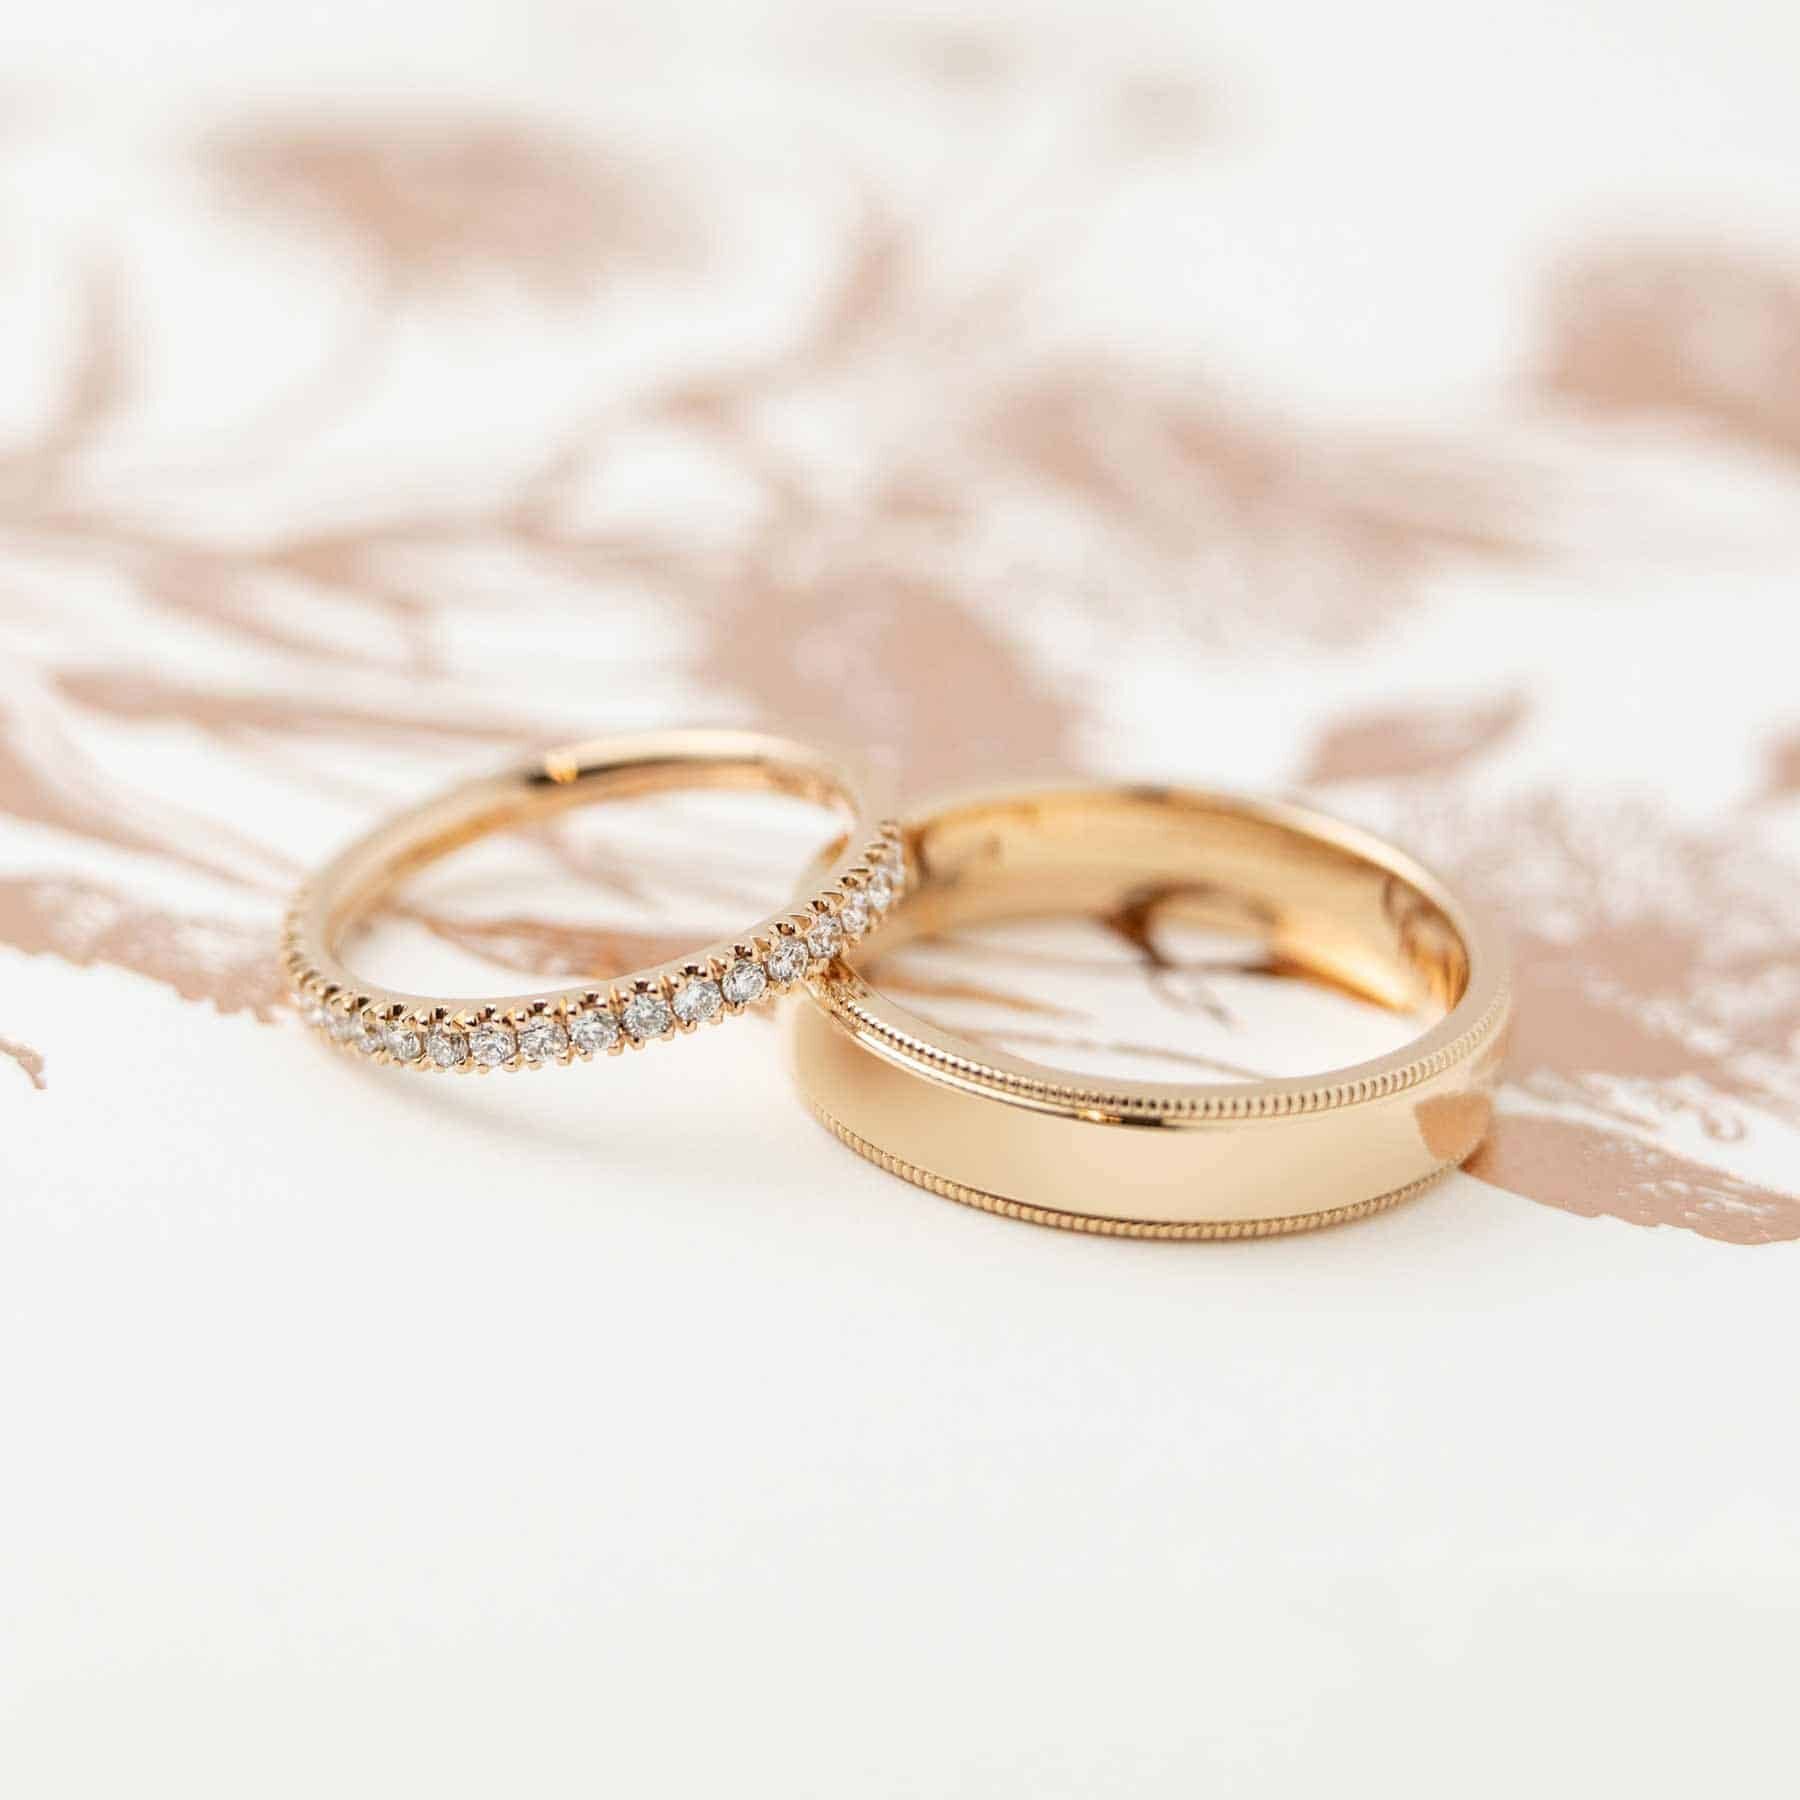 Larsen fine jewellery and ethical engagement rings